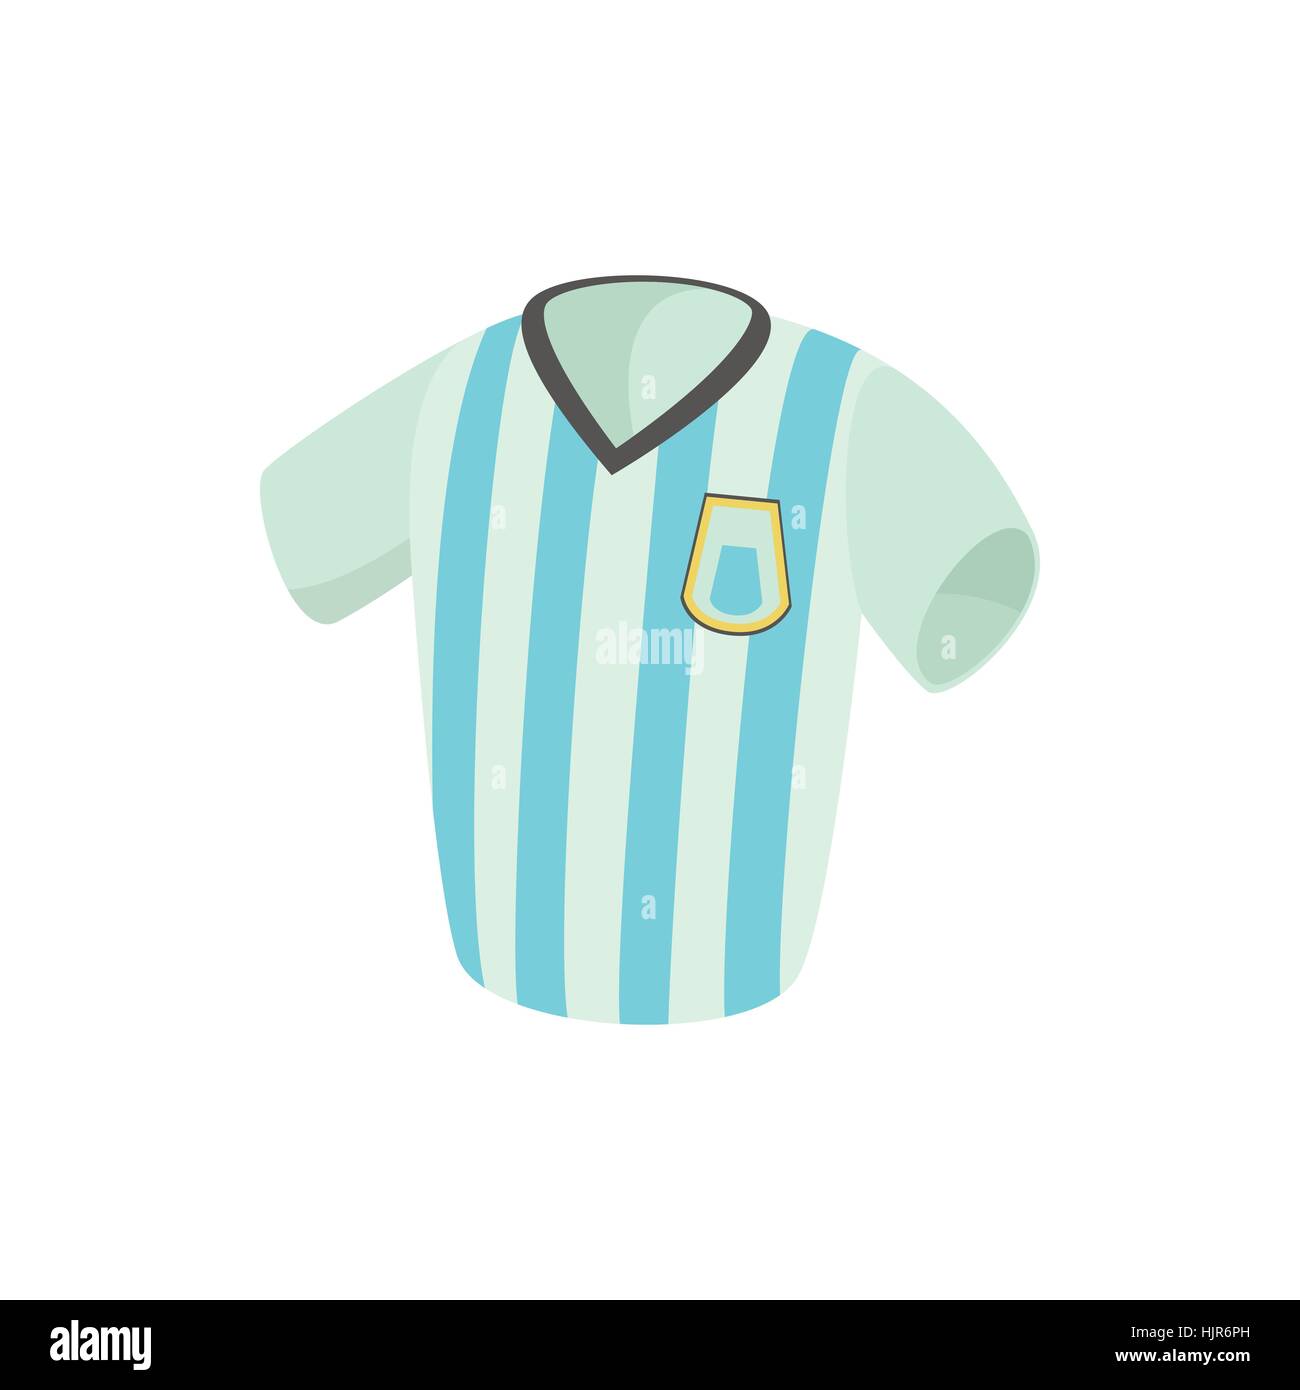 Argentina soccer jersey icon in cartoon style on a white background Stock Vector